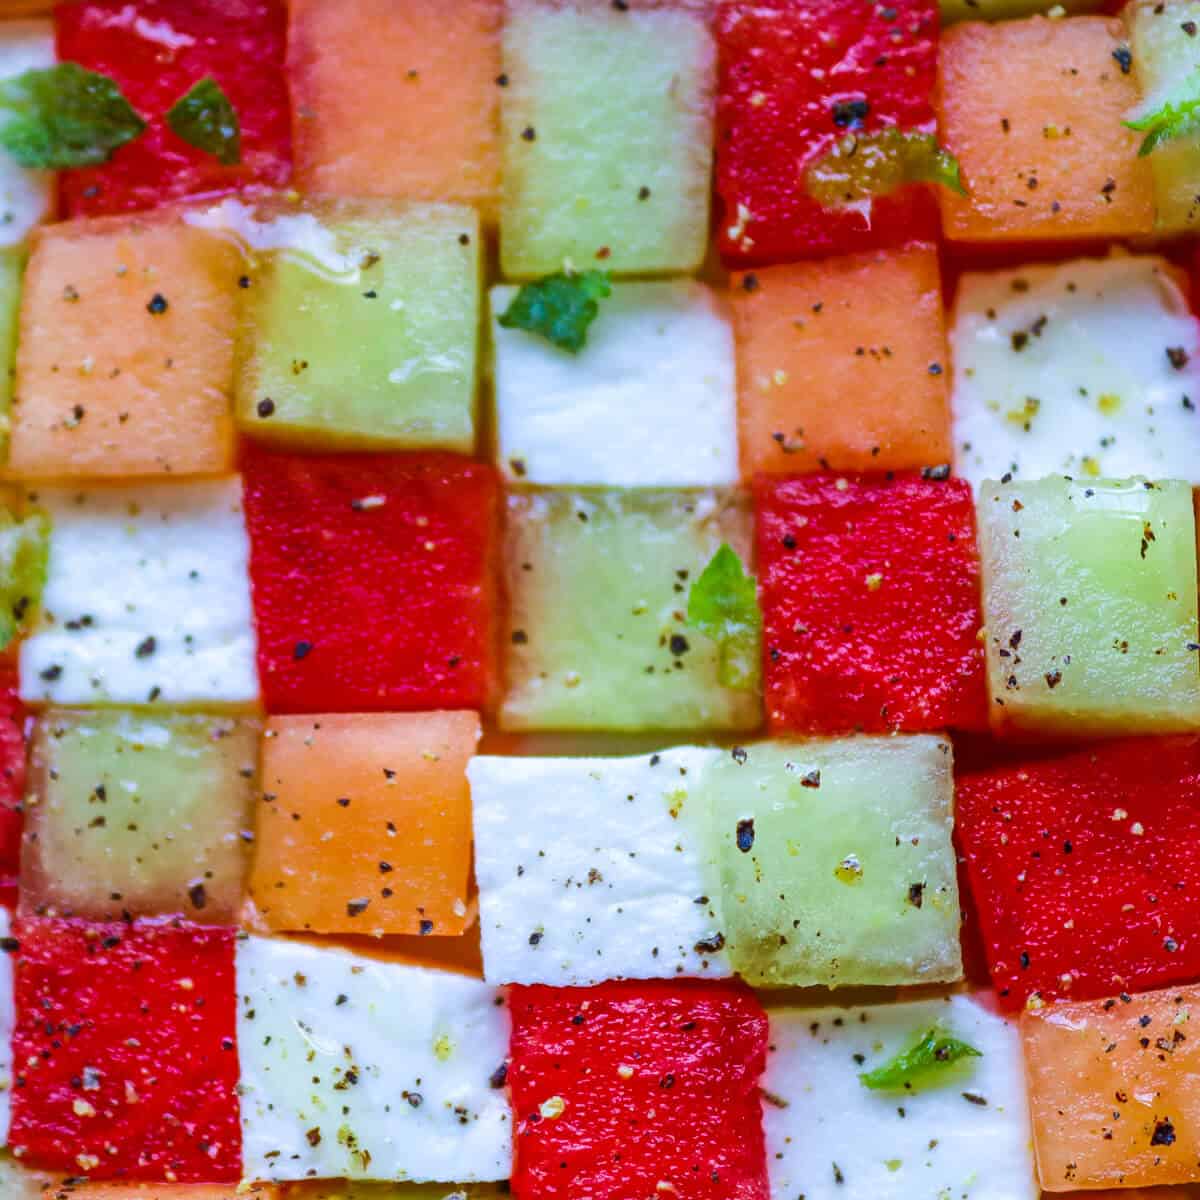 cubes of watermelon, cantaloupe lemon and gala melon with cubes of feta cheese in a chequerboard pattern